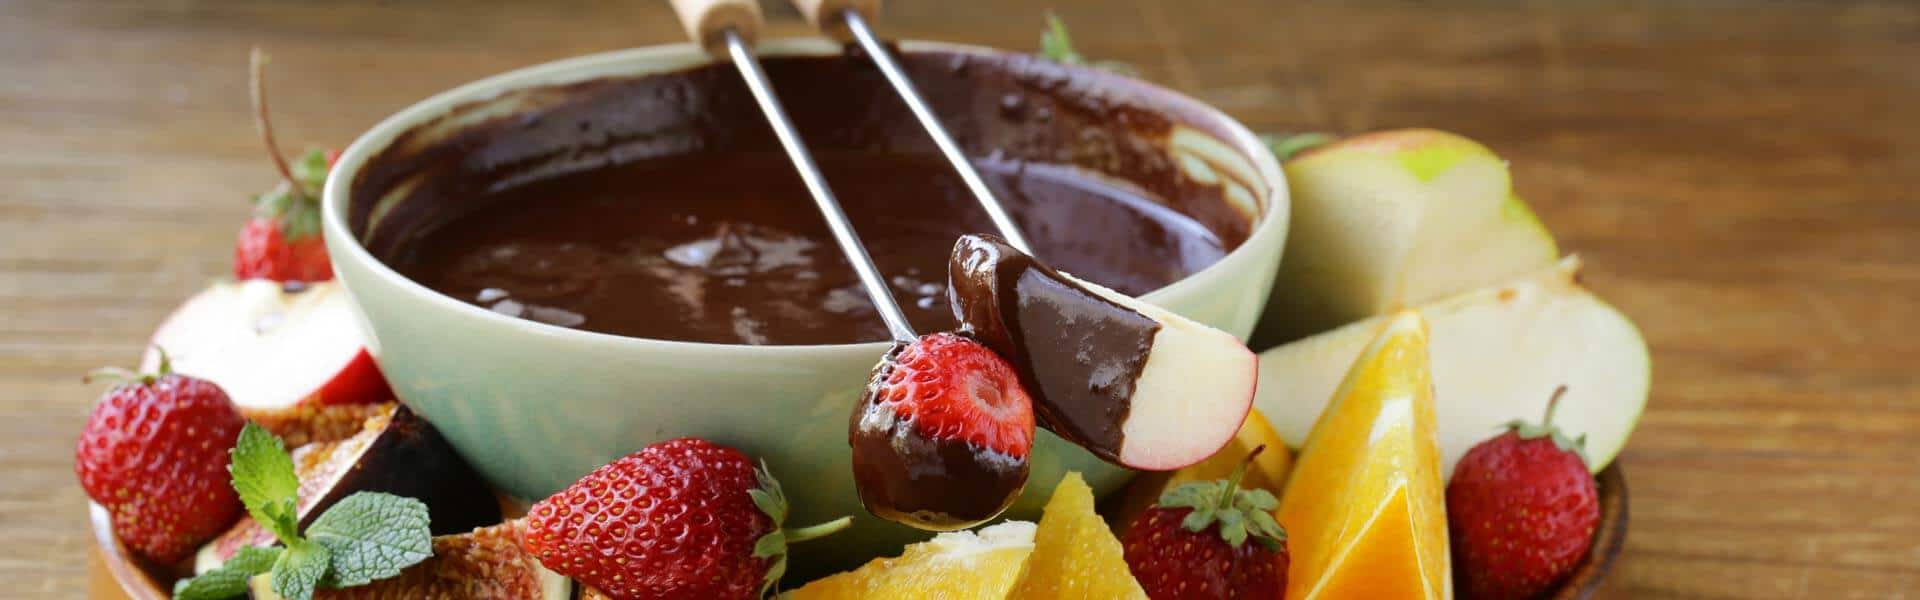 Mobile Fondue Event with Chocolate Fondue as dessert. Enjoyable Christmas party idea with b-ceed events